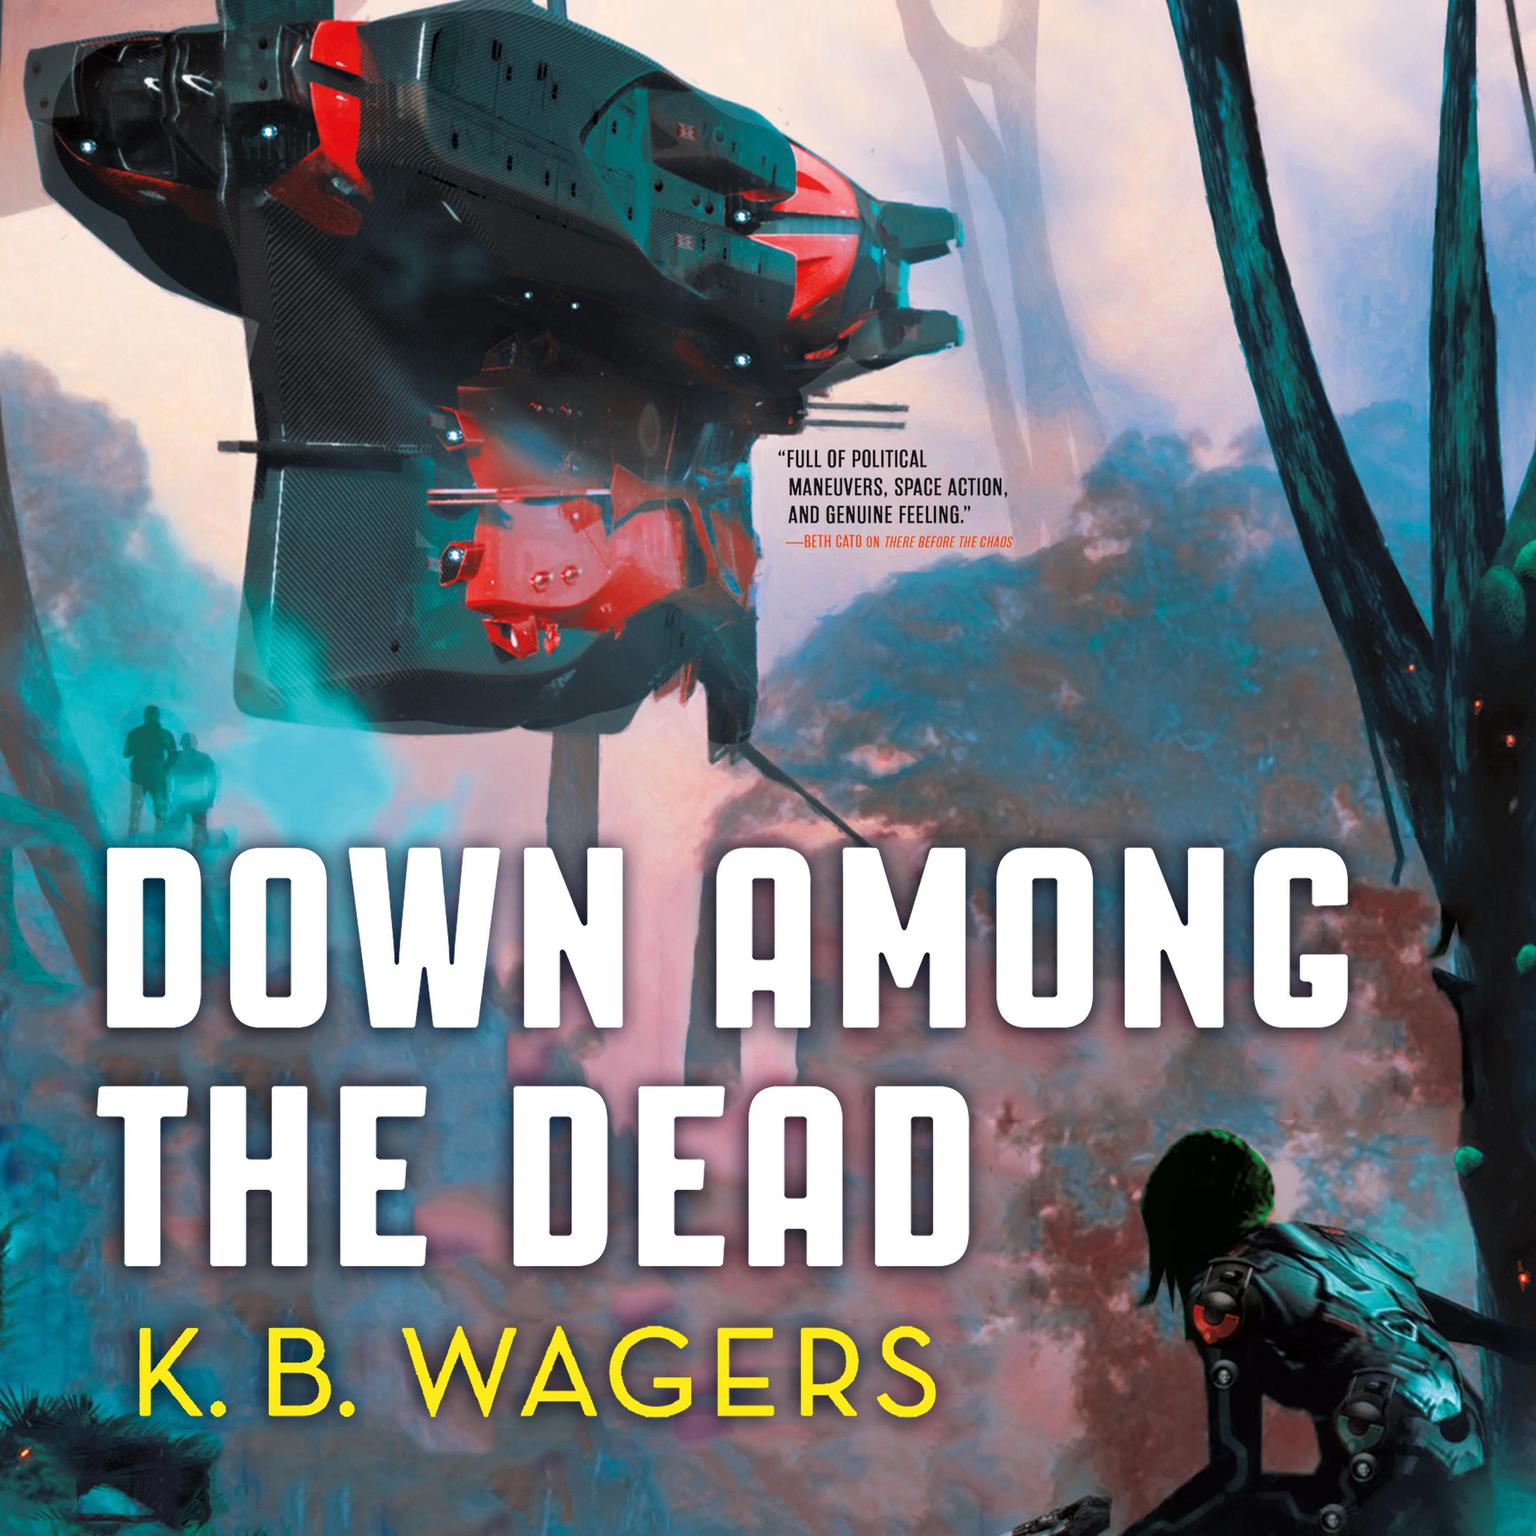 Down Among the Dead: The Farian War Book 2 Audiobook, by K. B. Wagers